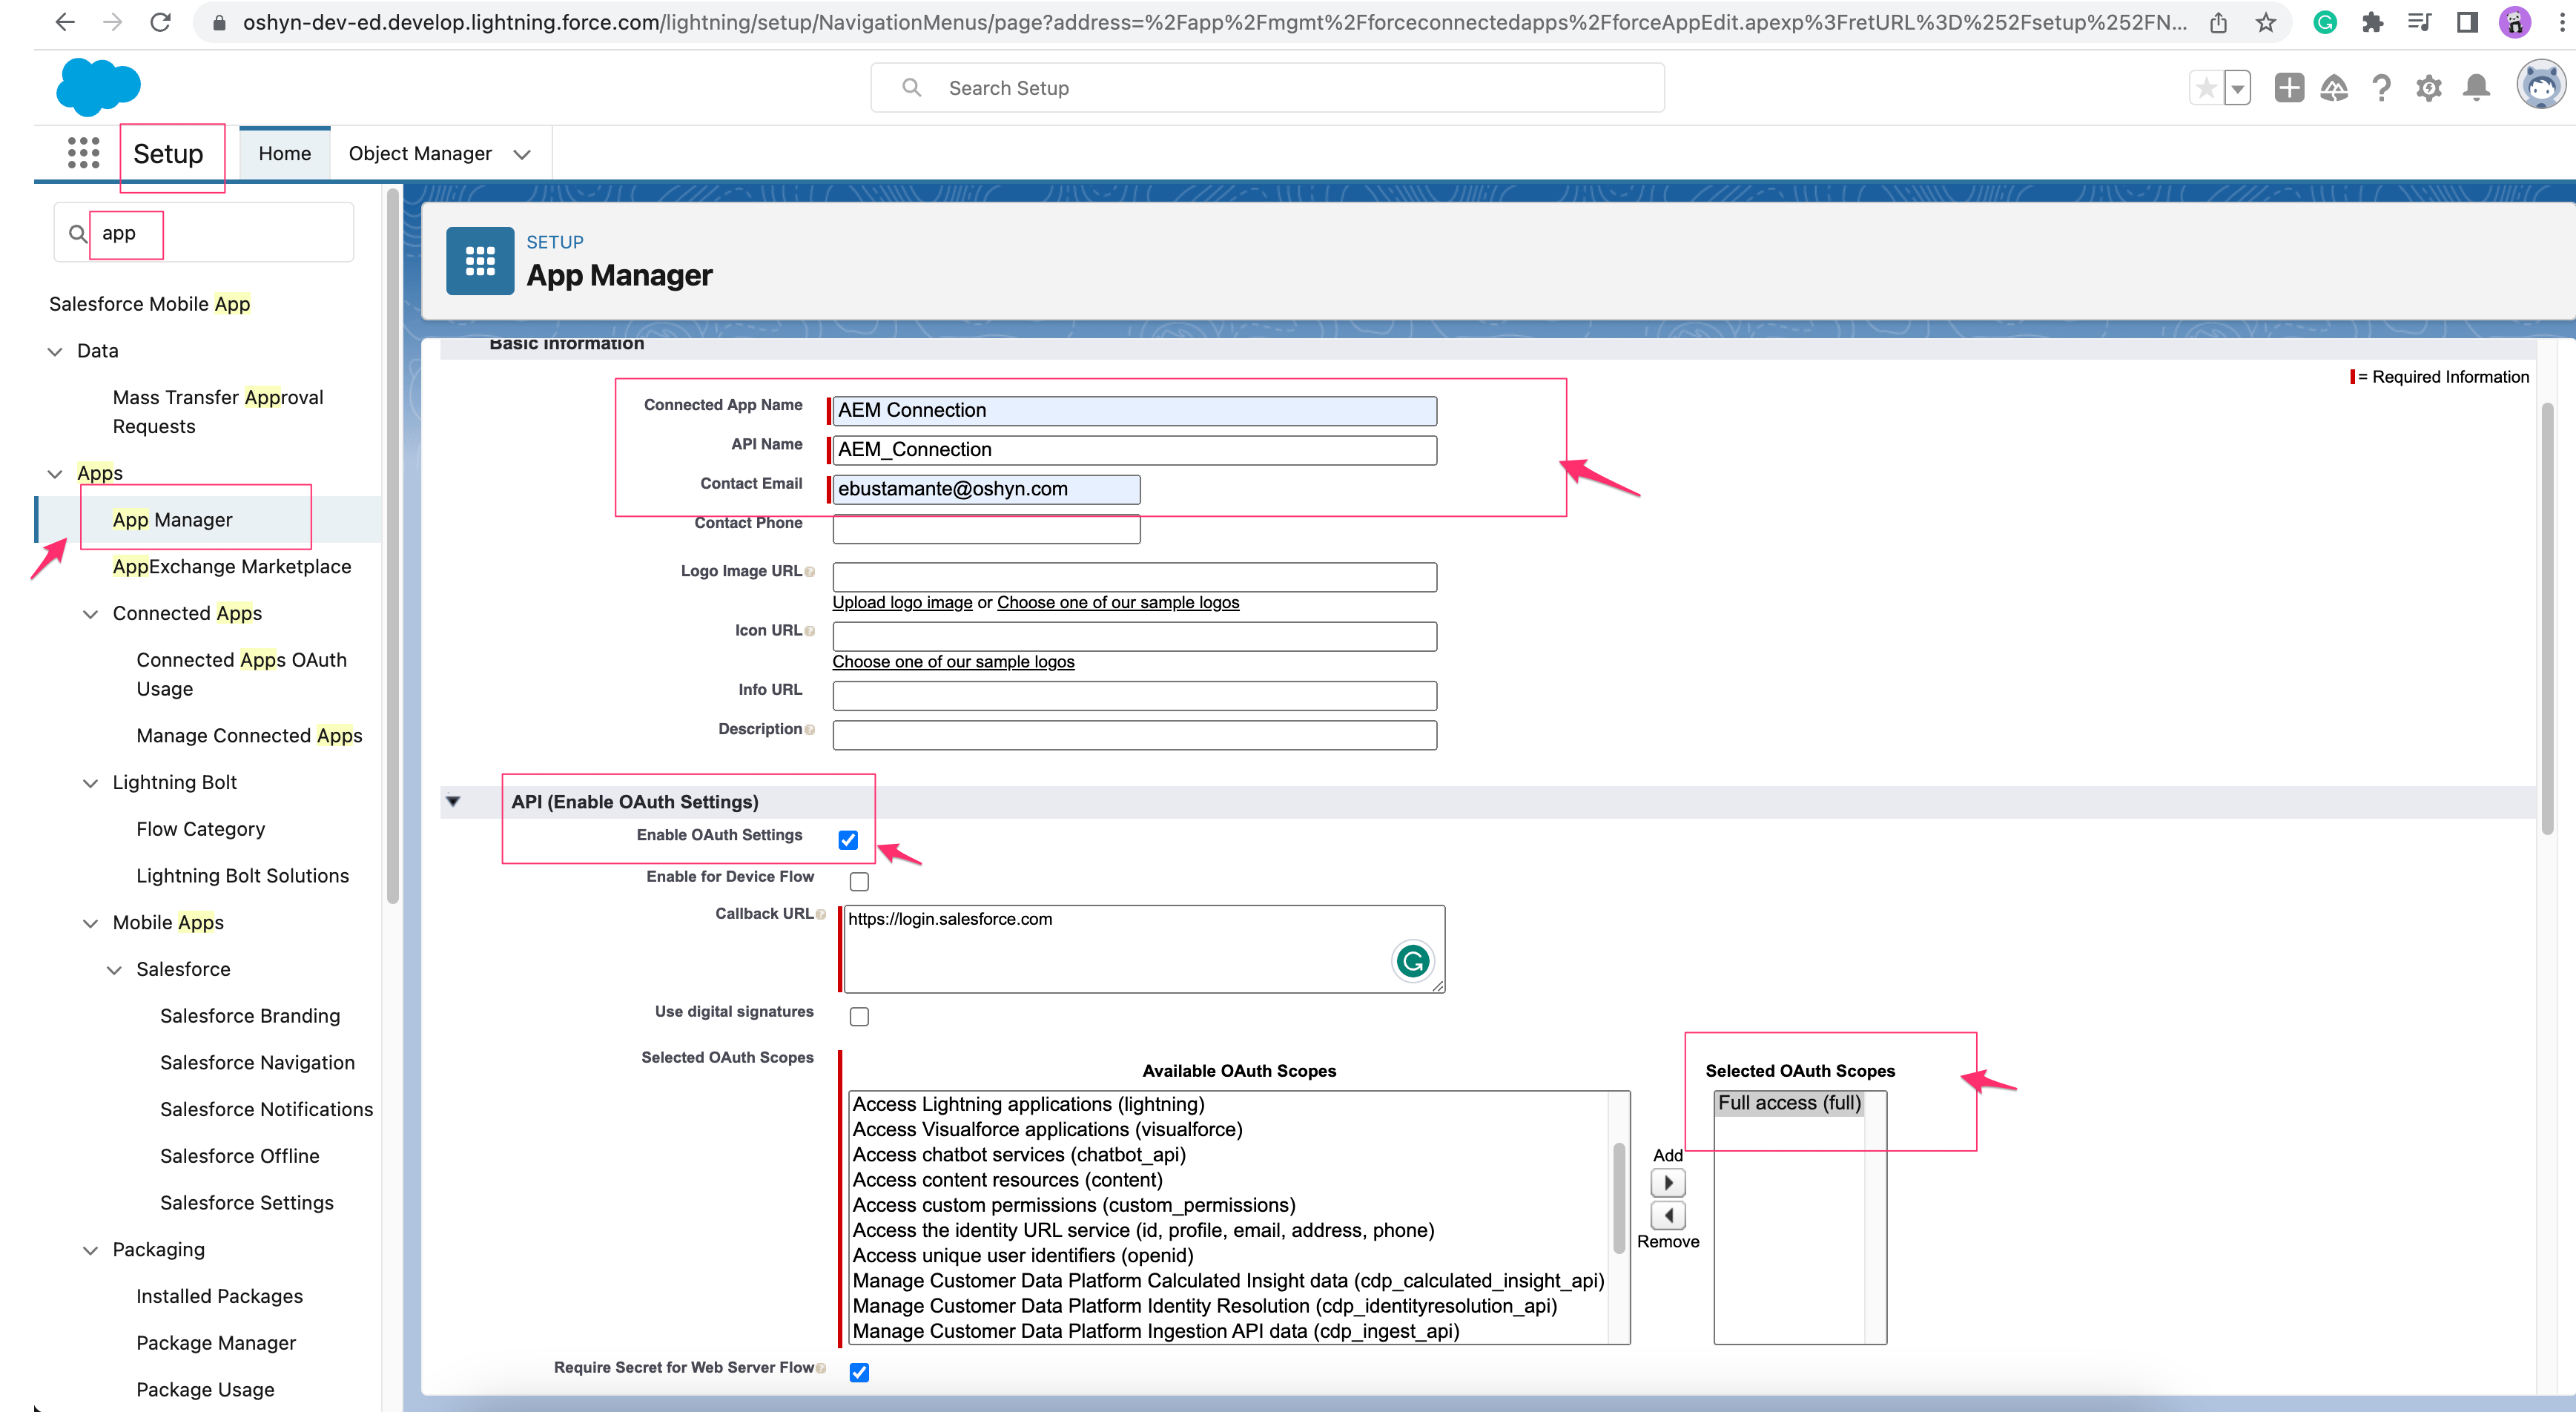 Salesforce app manager console